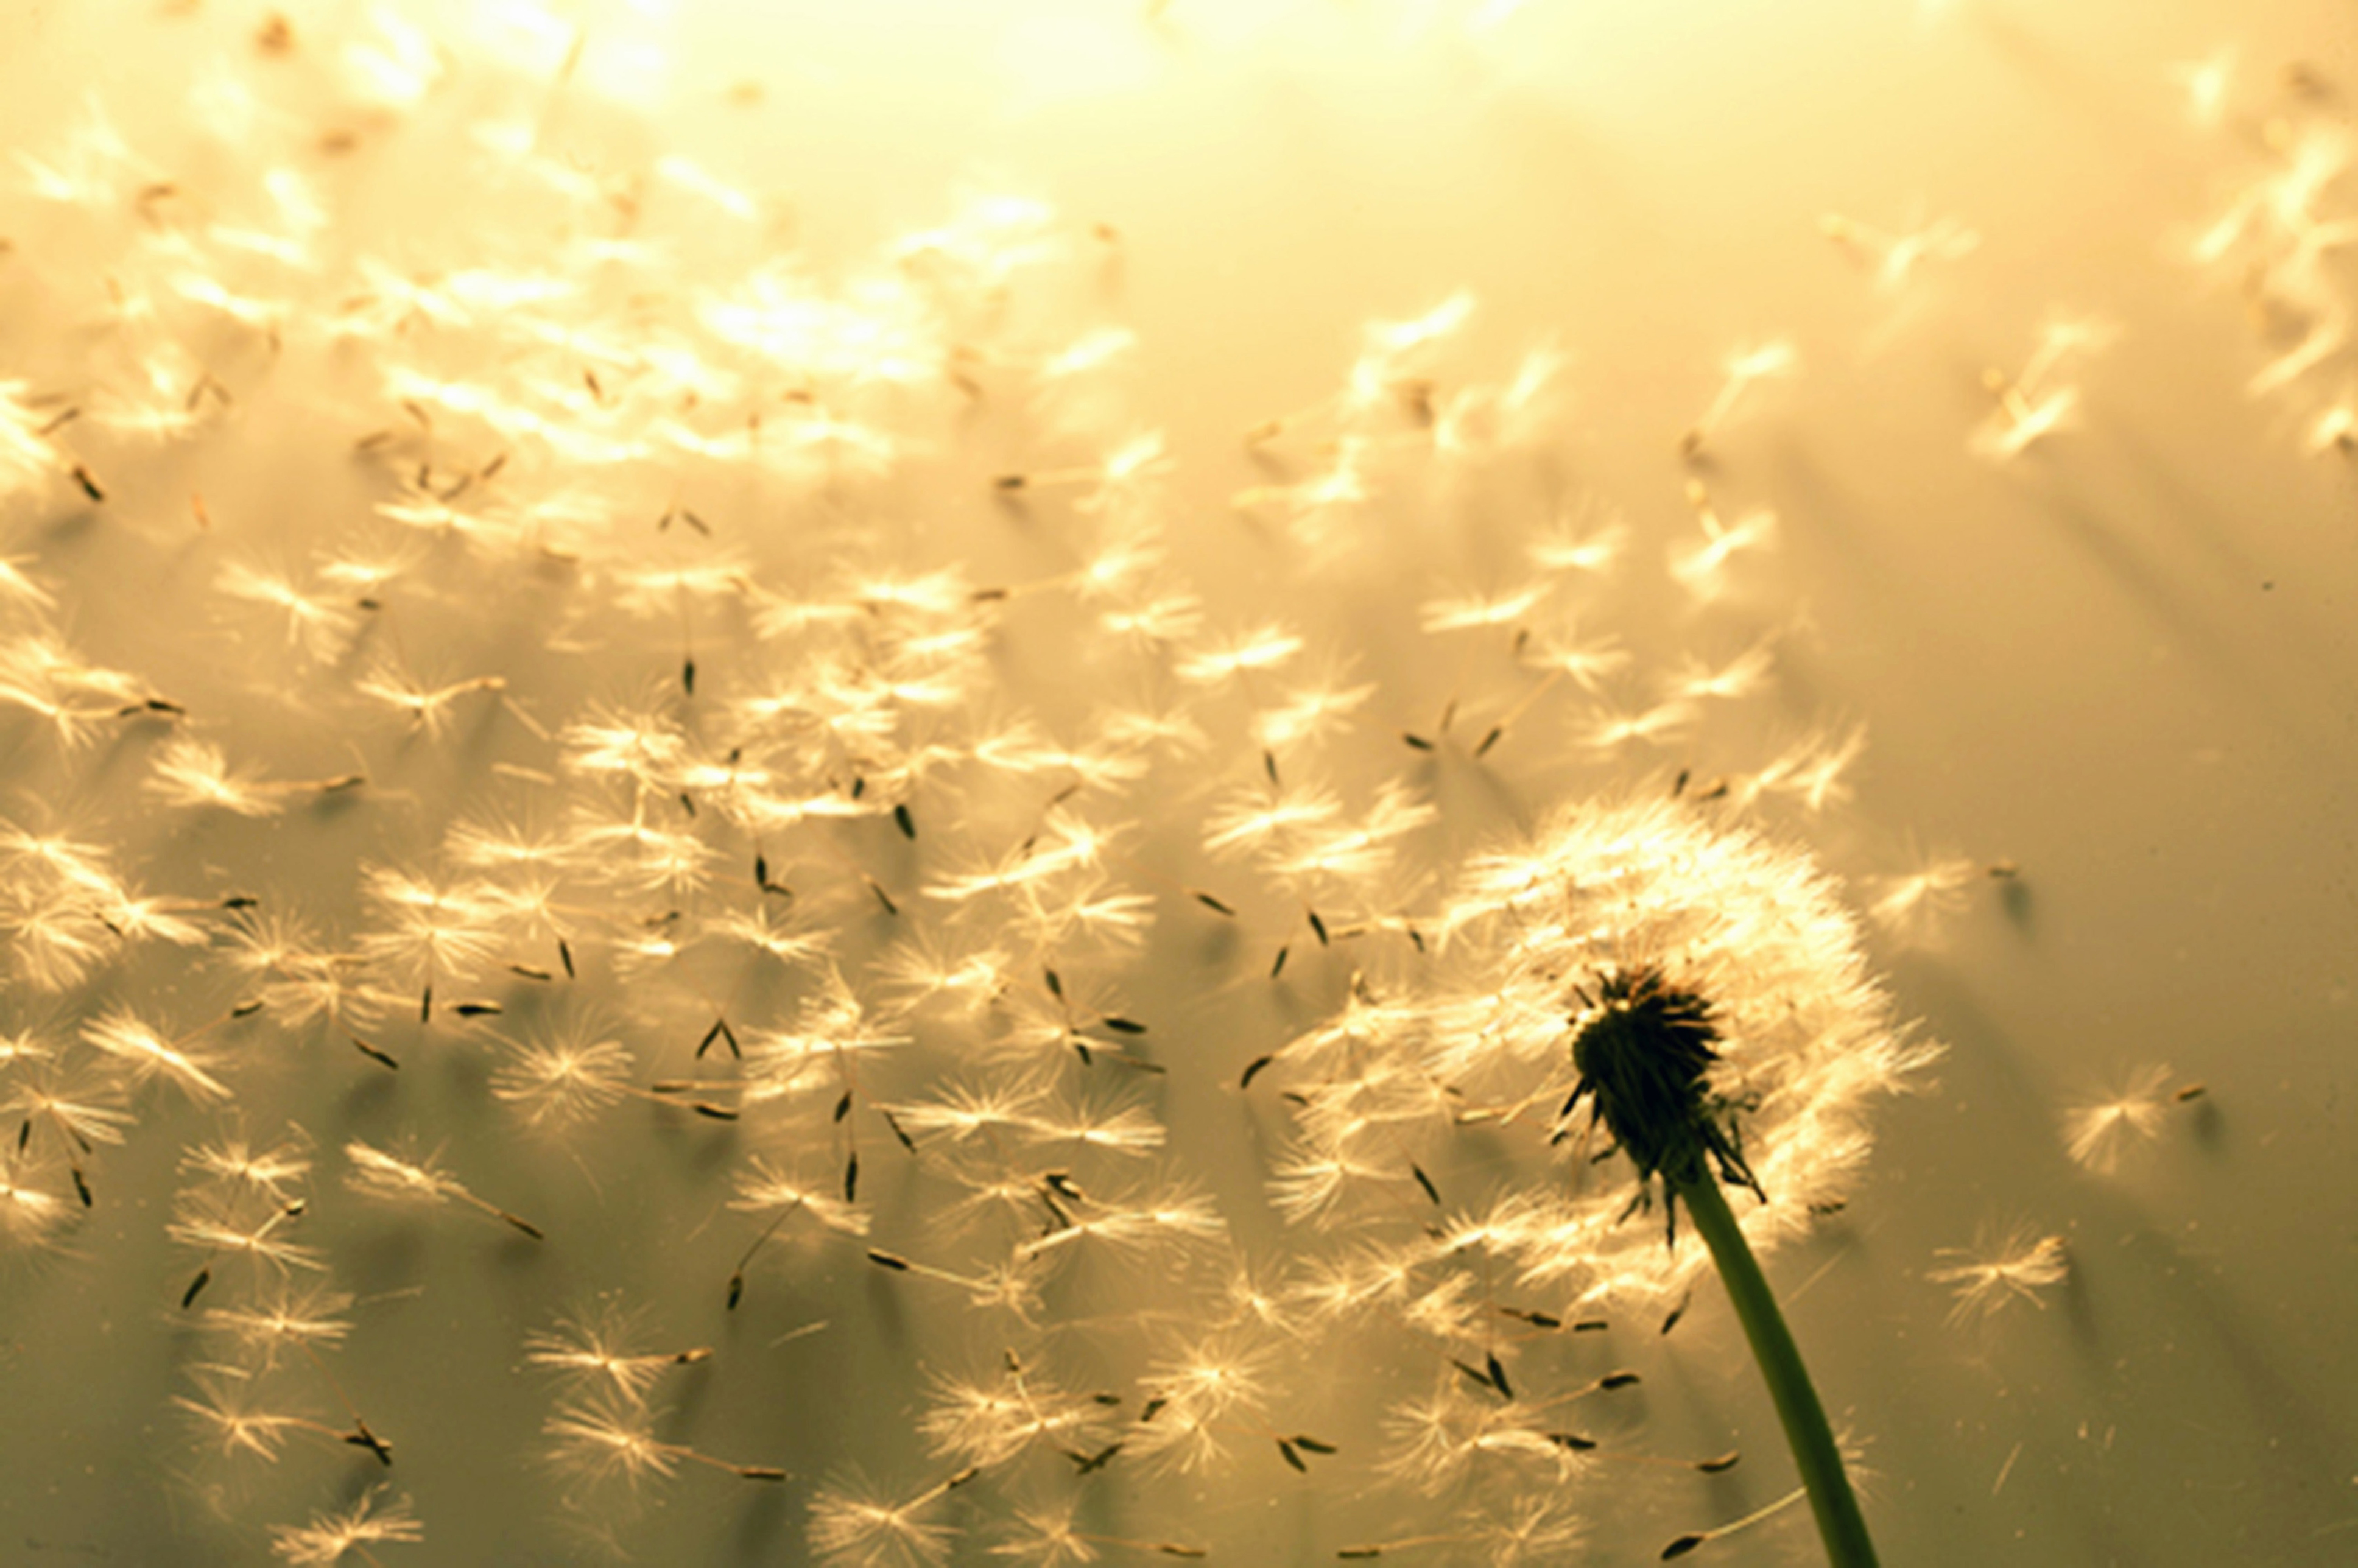 A photo of a dandelion with seeds blowing in the wind